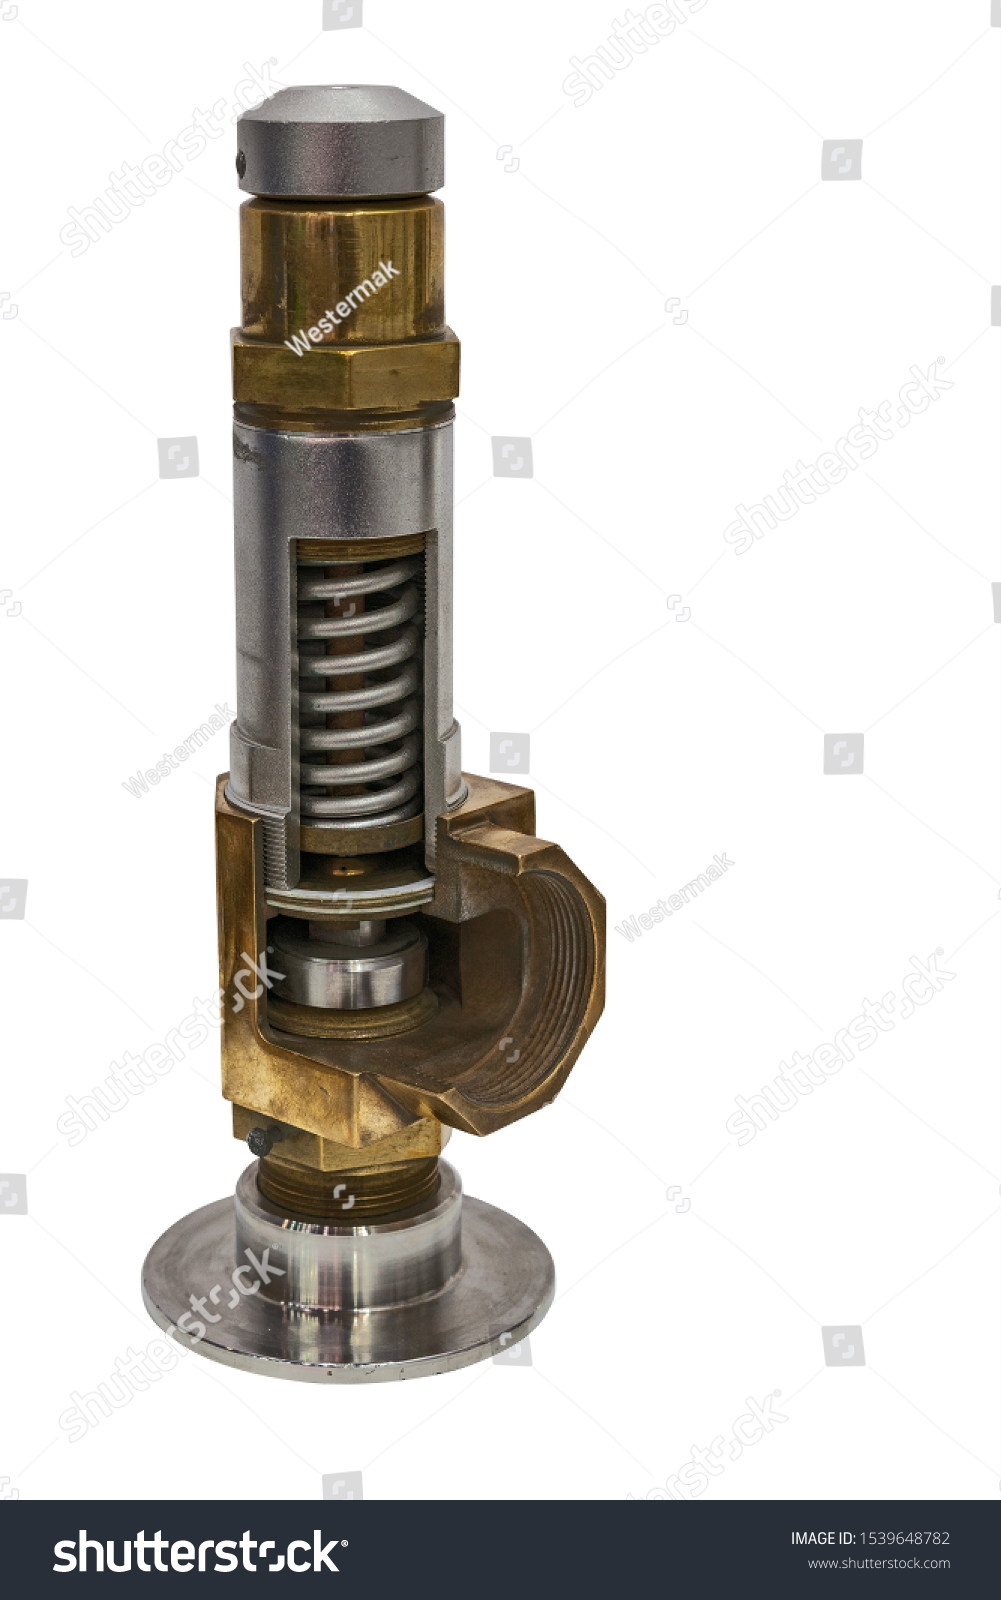 cross section of a small pressure relief valve isolated on a white background #1539648782